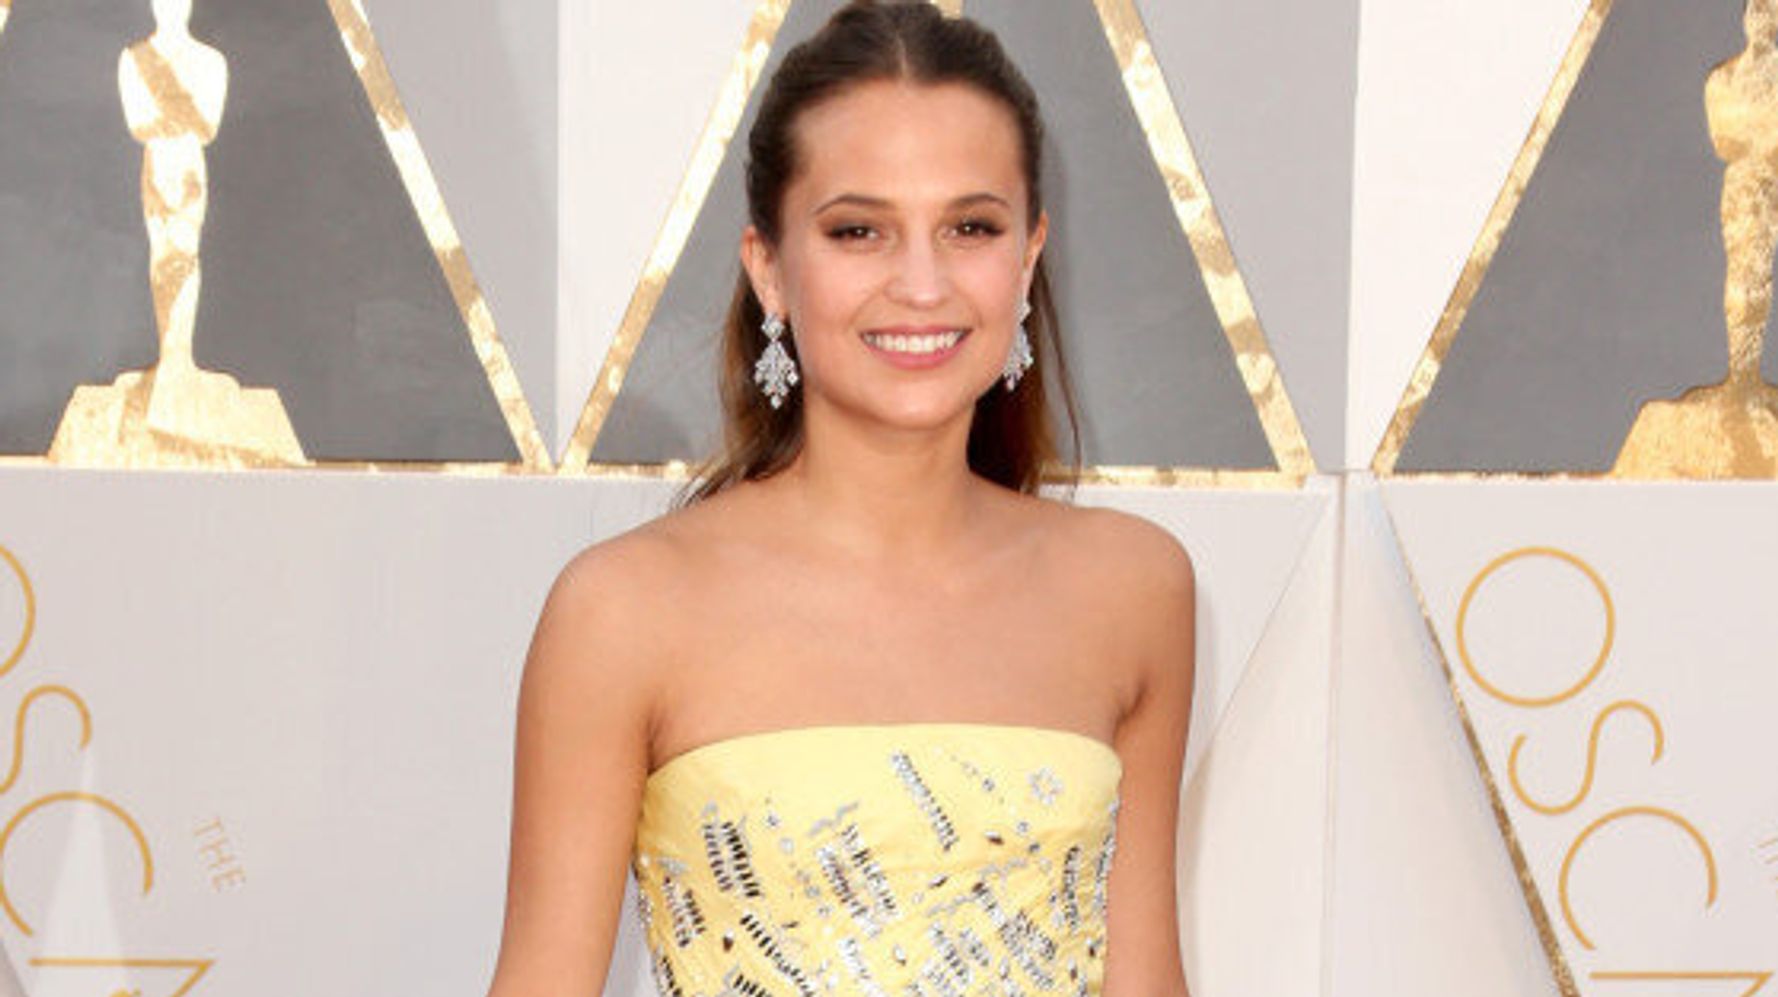 Alicia Vikander At The Oscars 2016 In Louis Vuitton